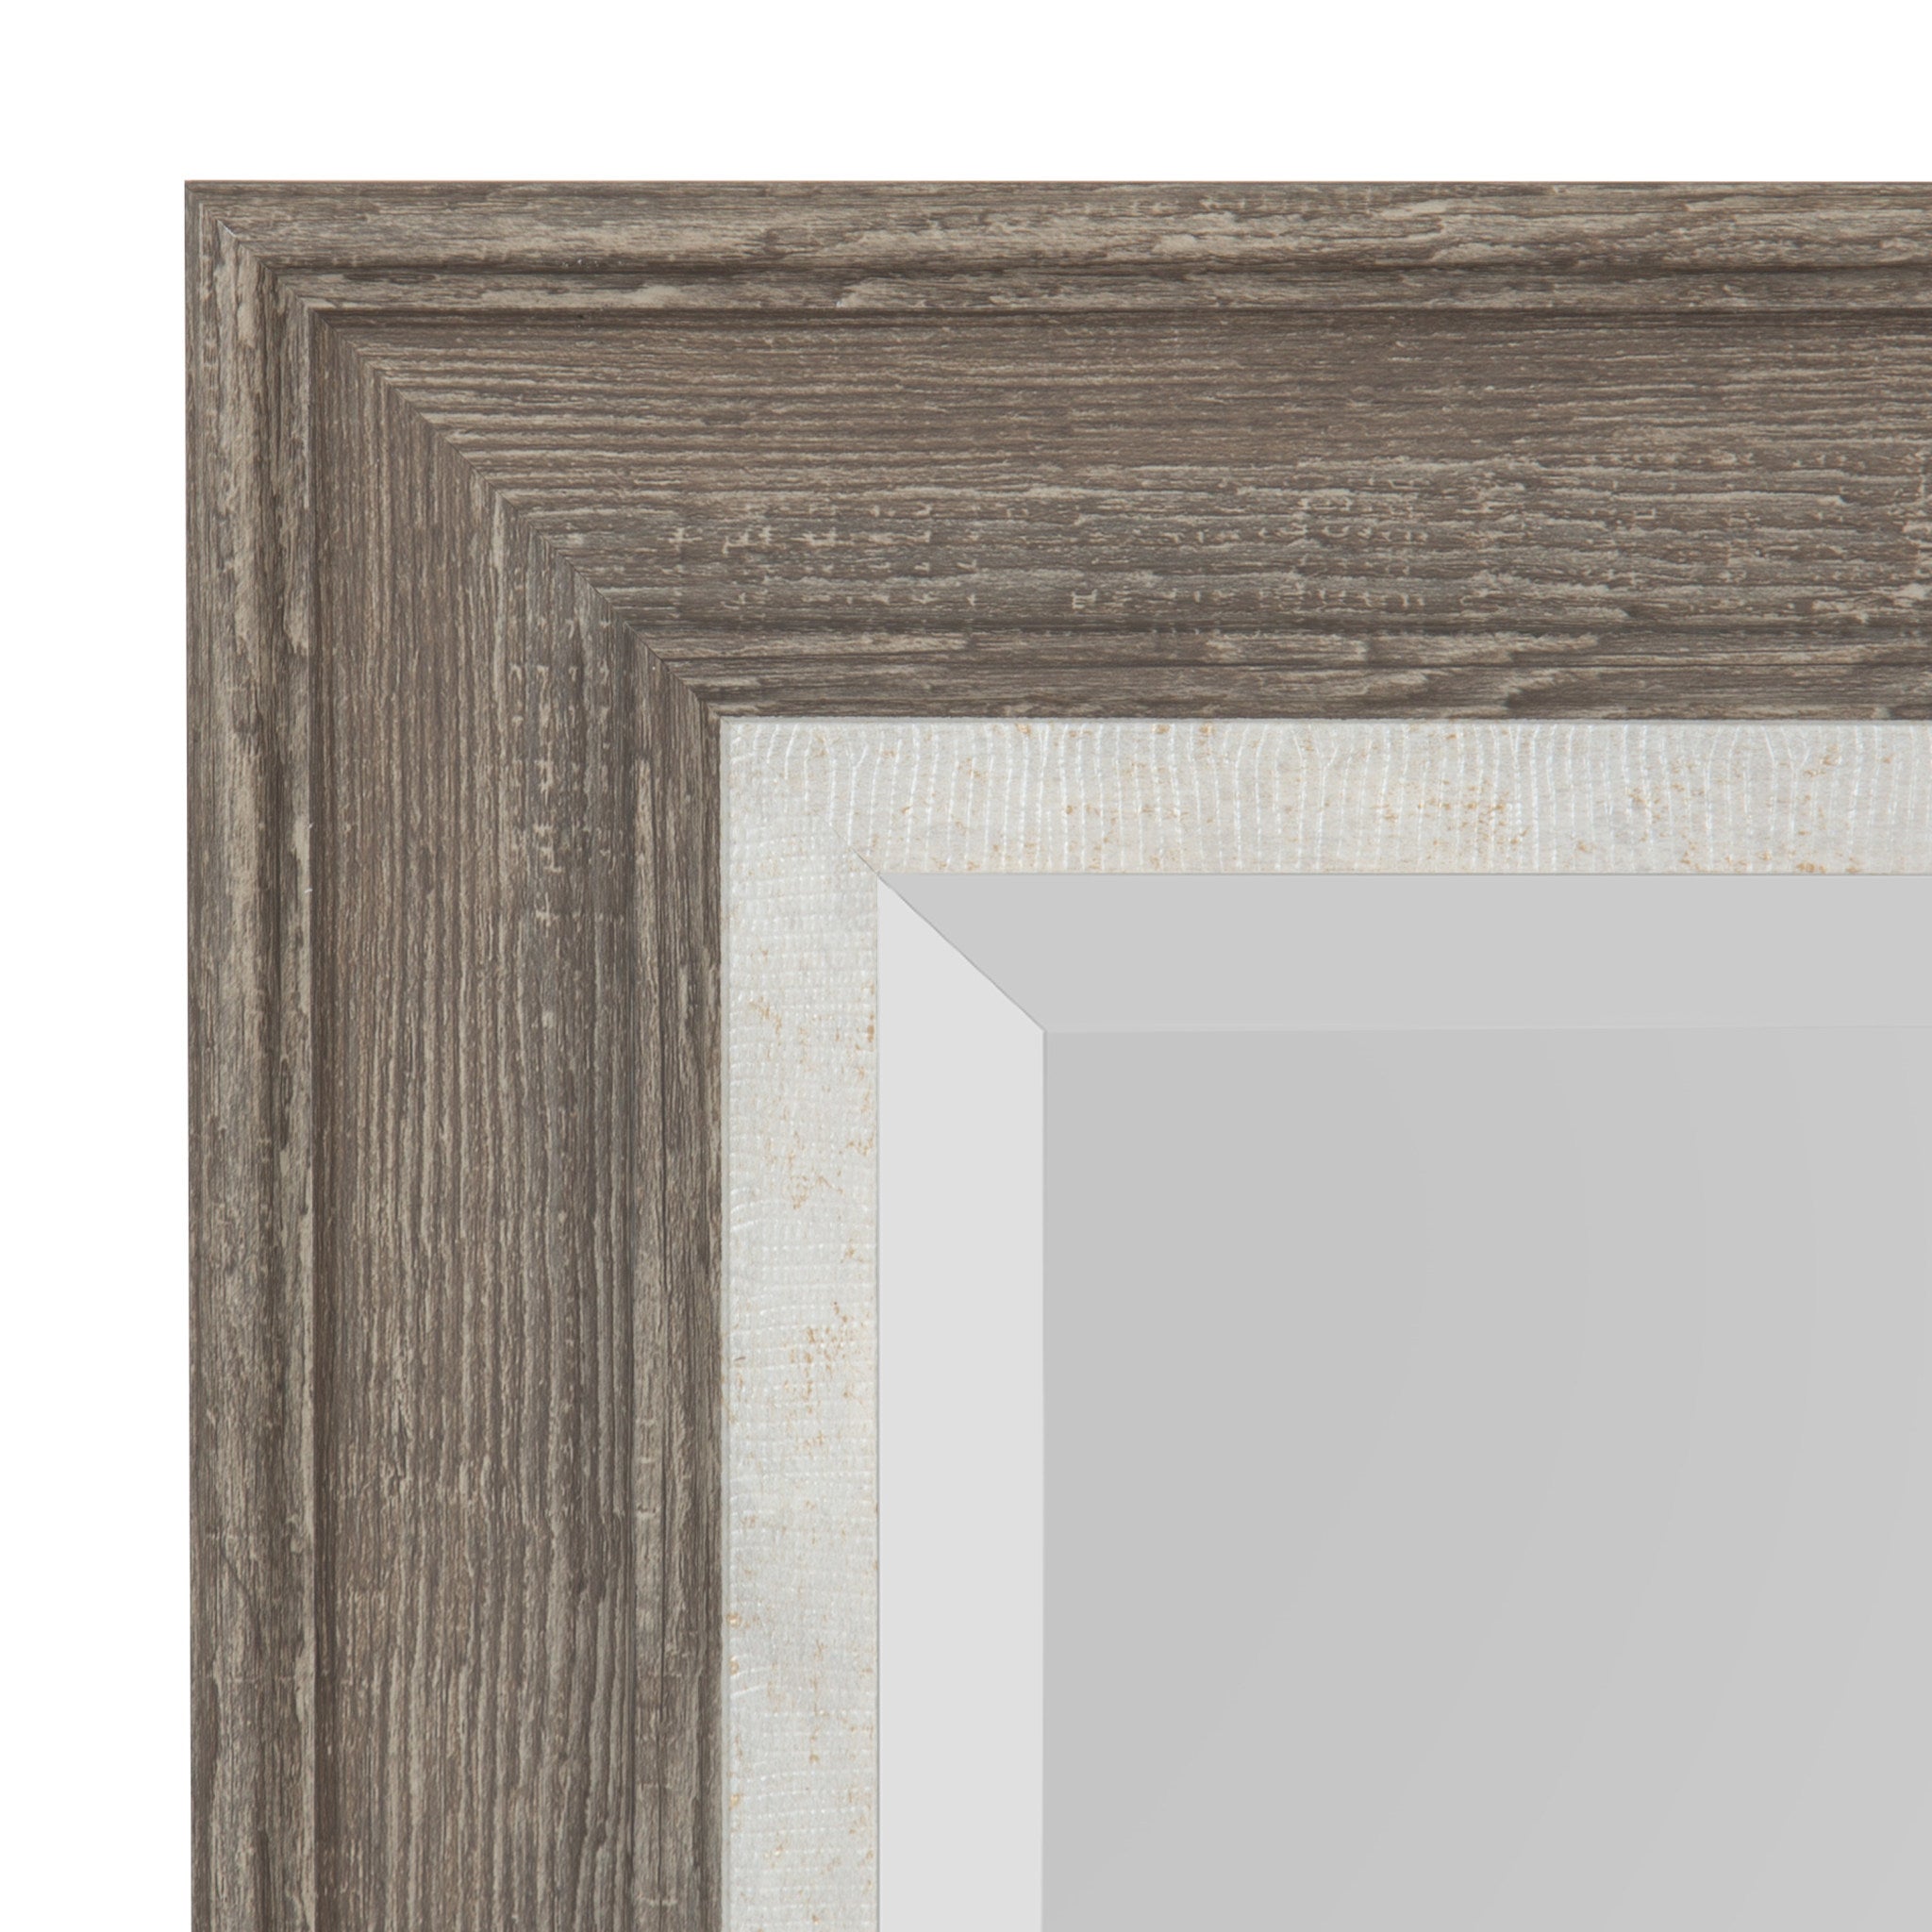 Woodway Framed Wall Mirror